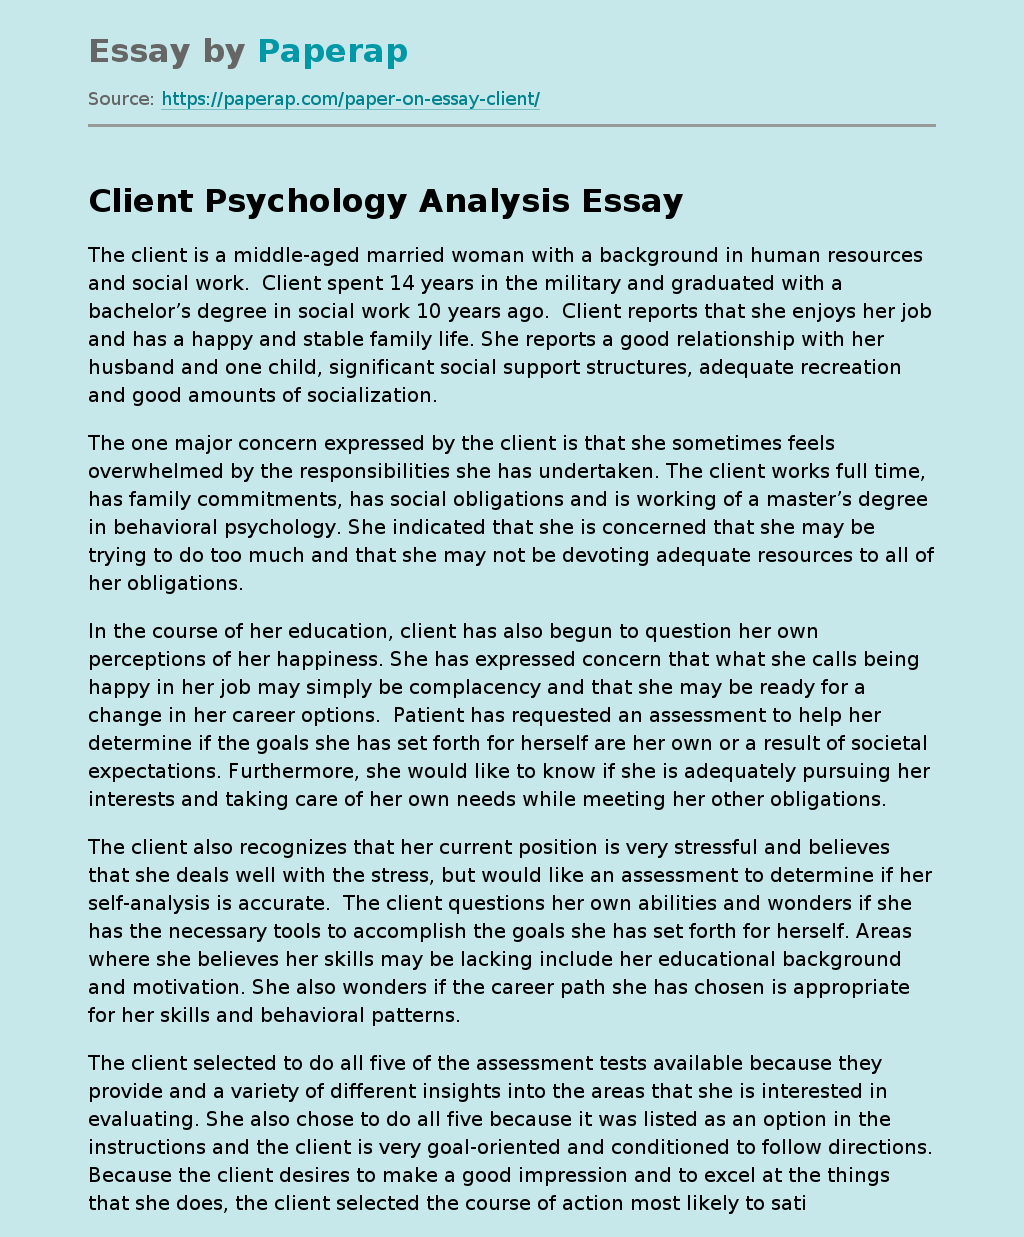 Client Psychology Analysis